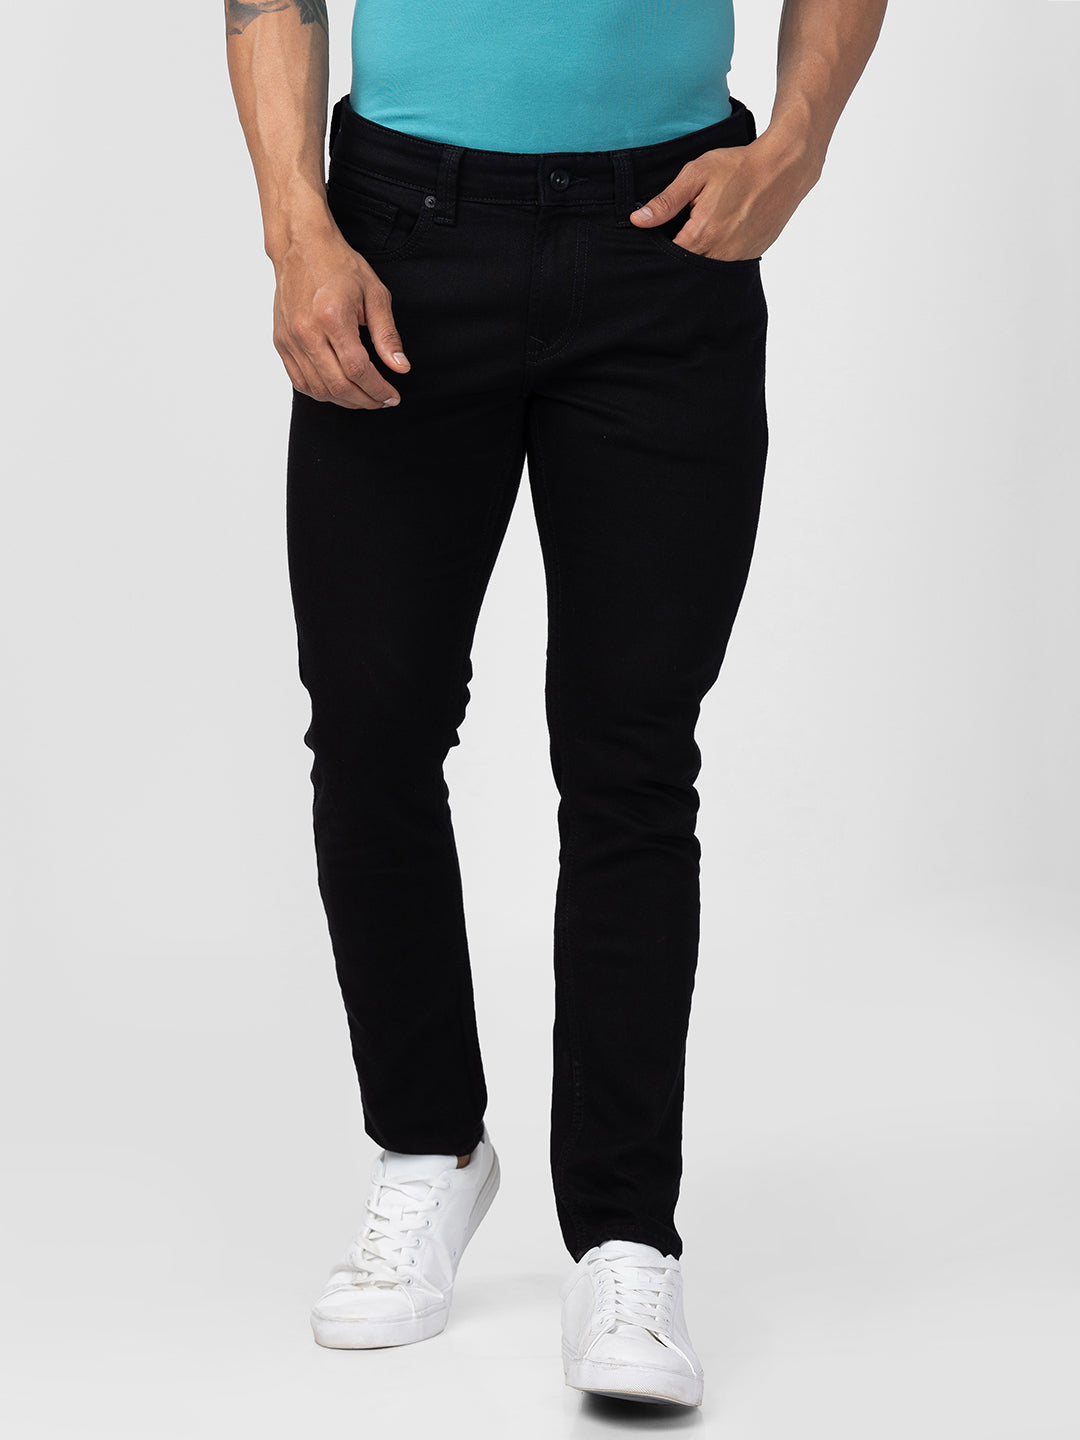 What do you think of ankle length jeans on guys? - Quora